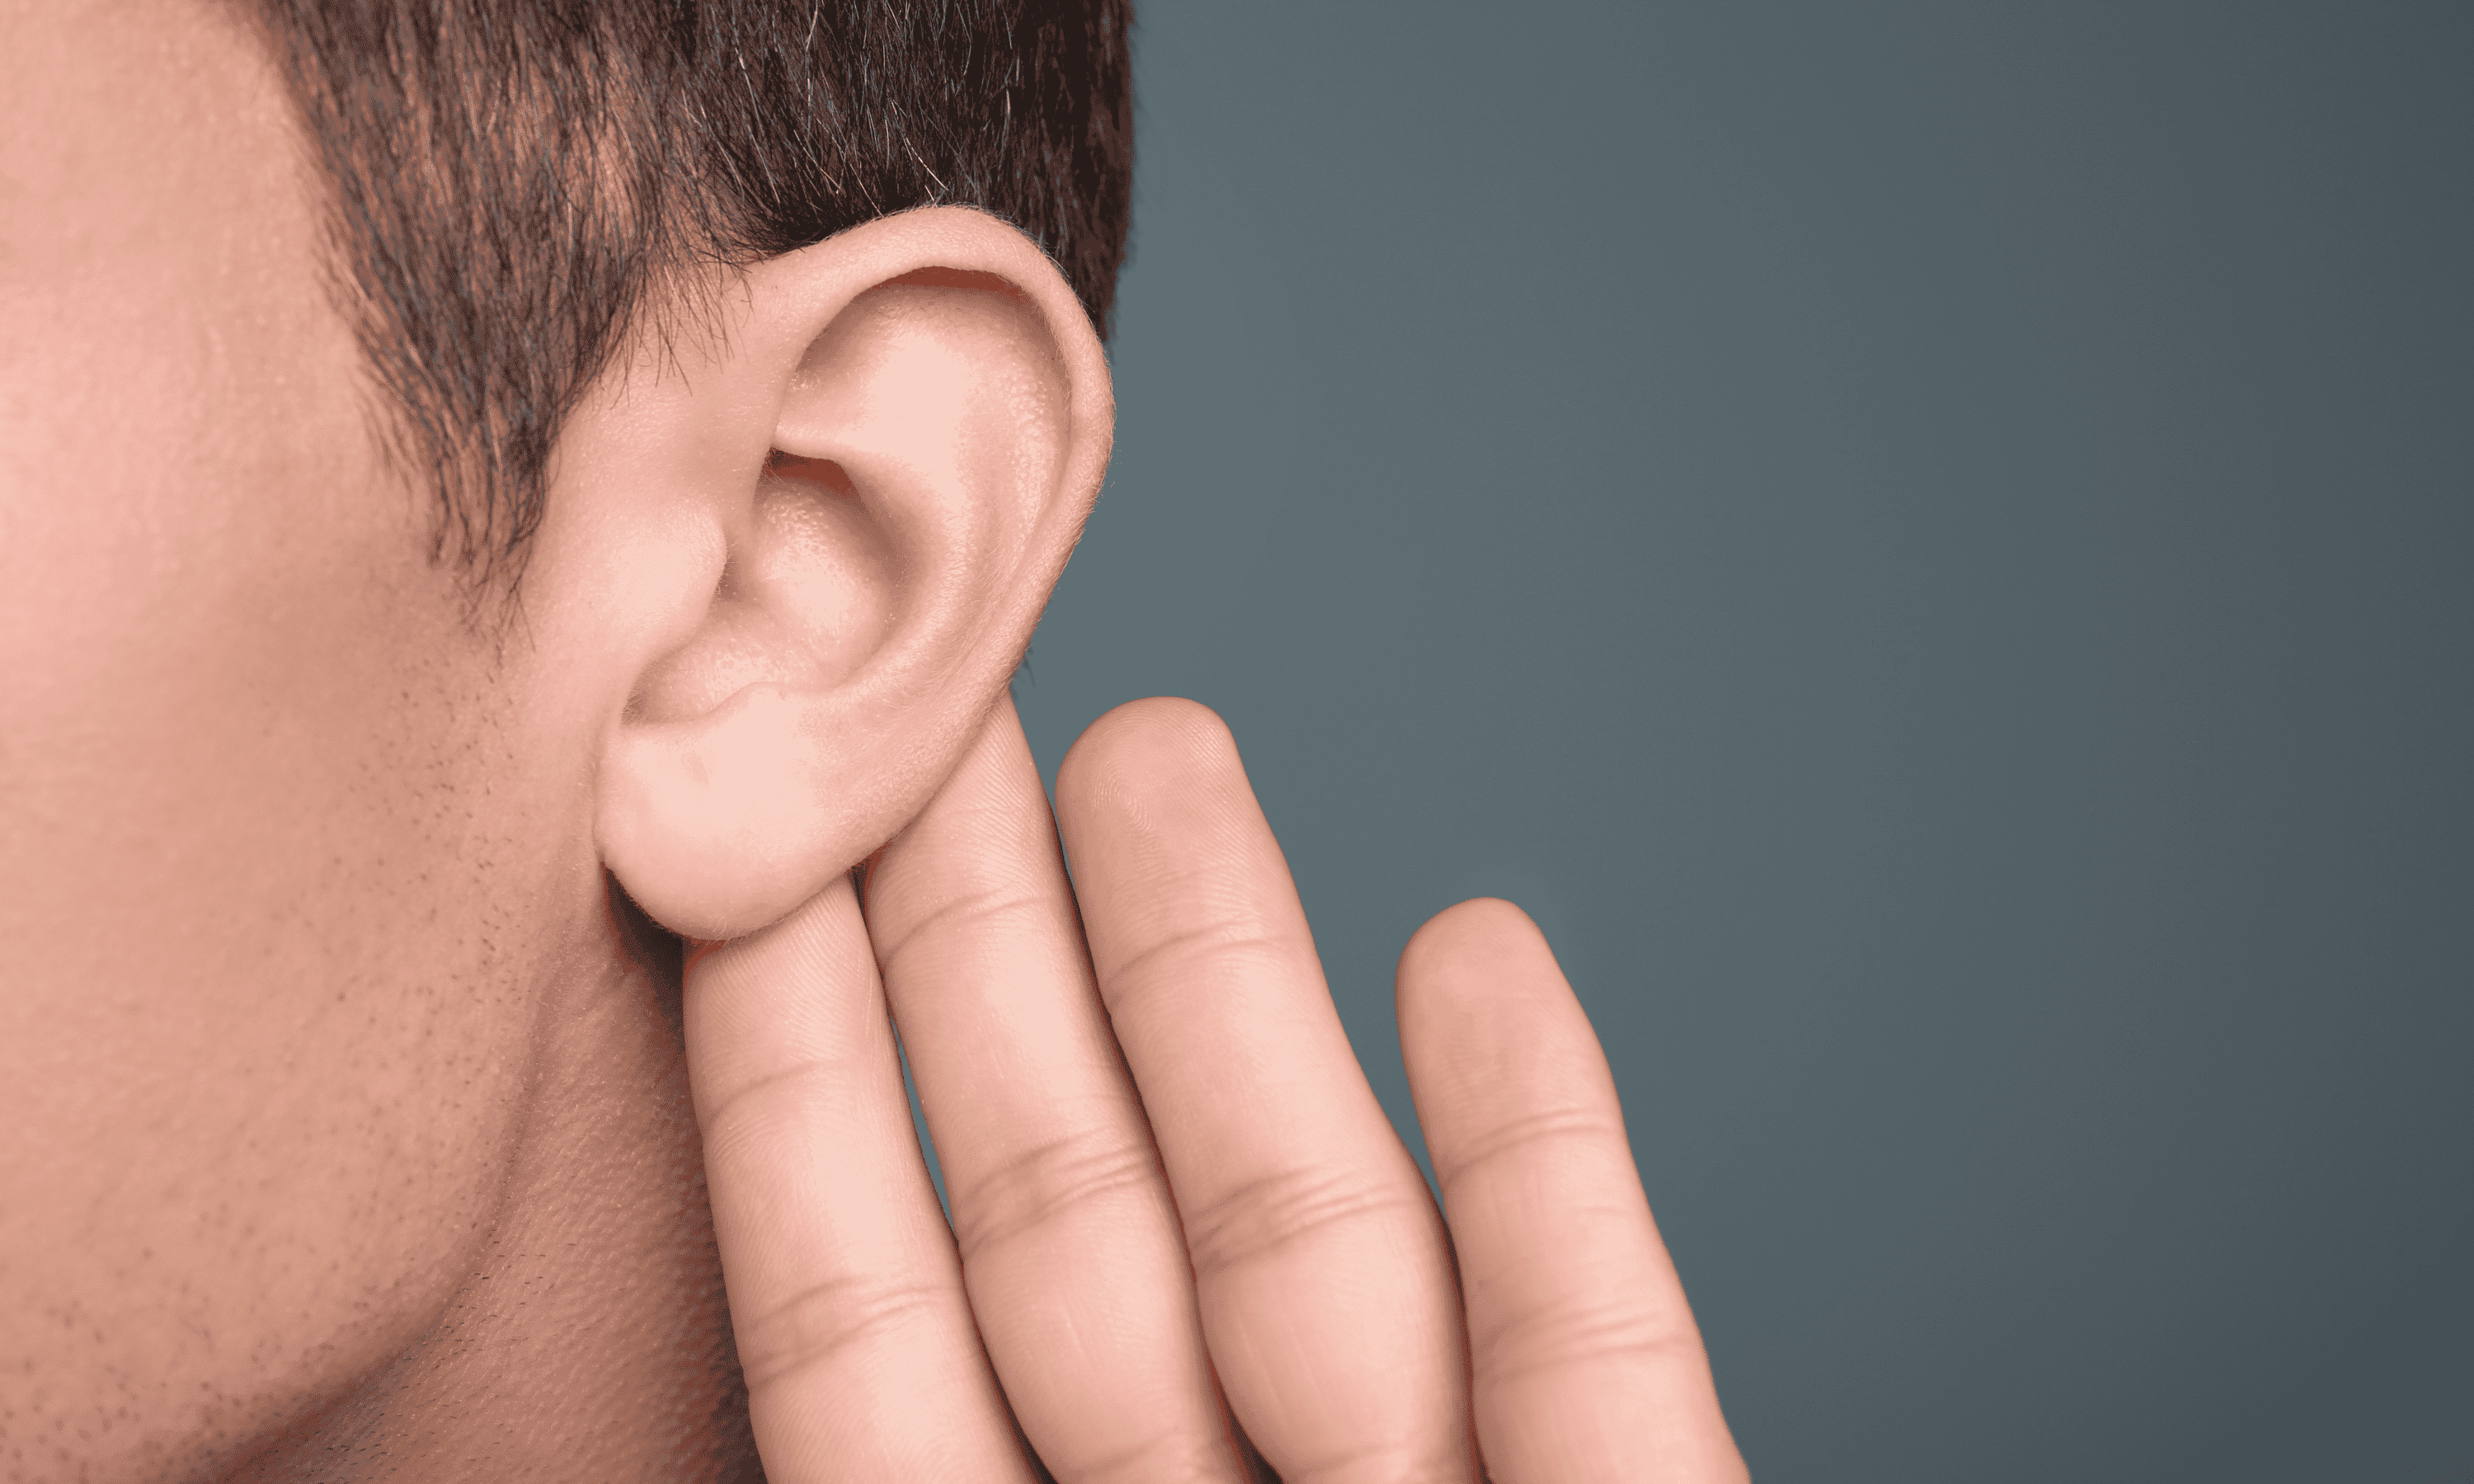 Everything you need to know about ear correction